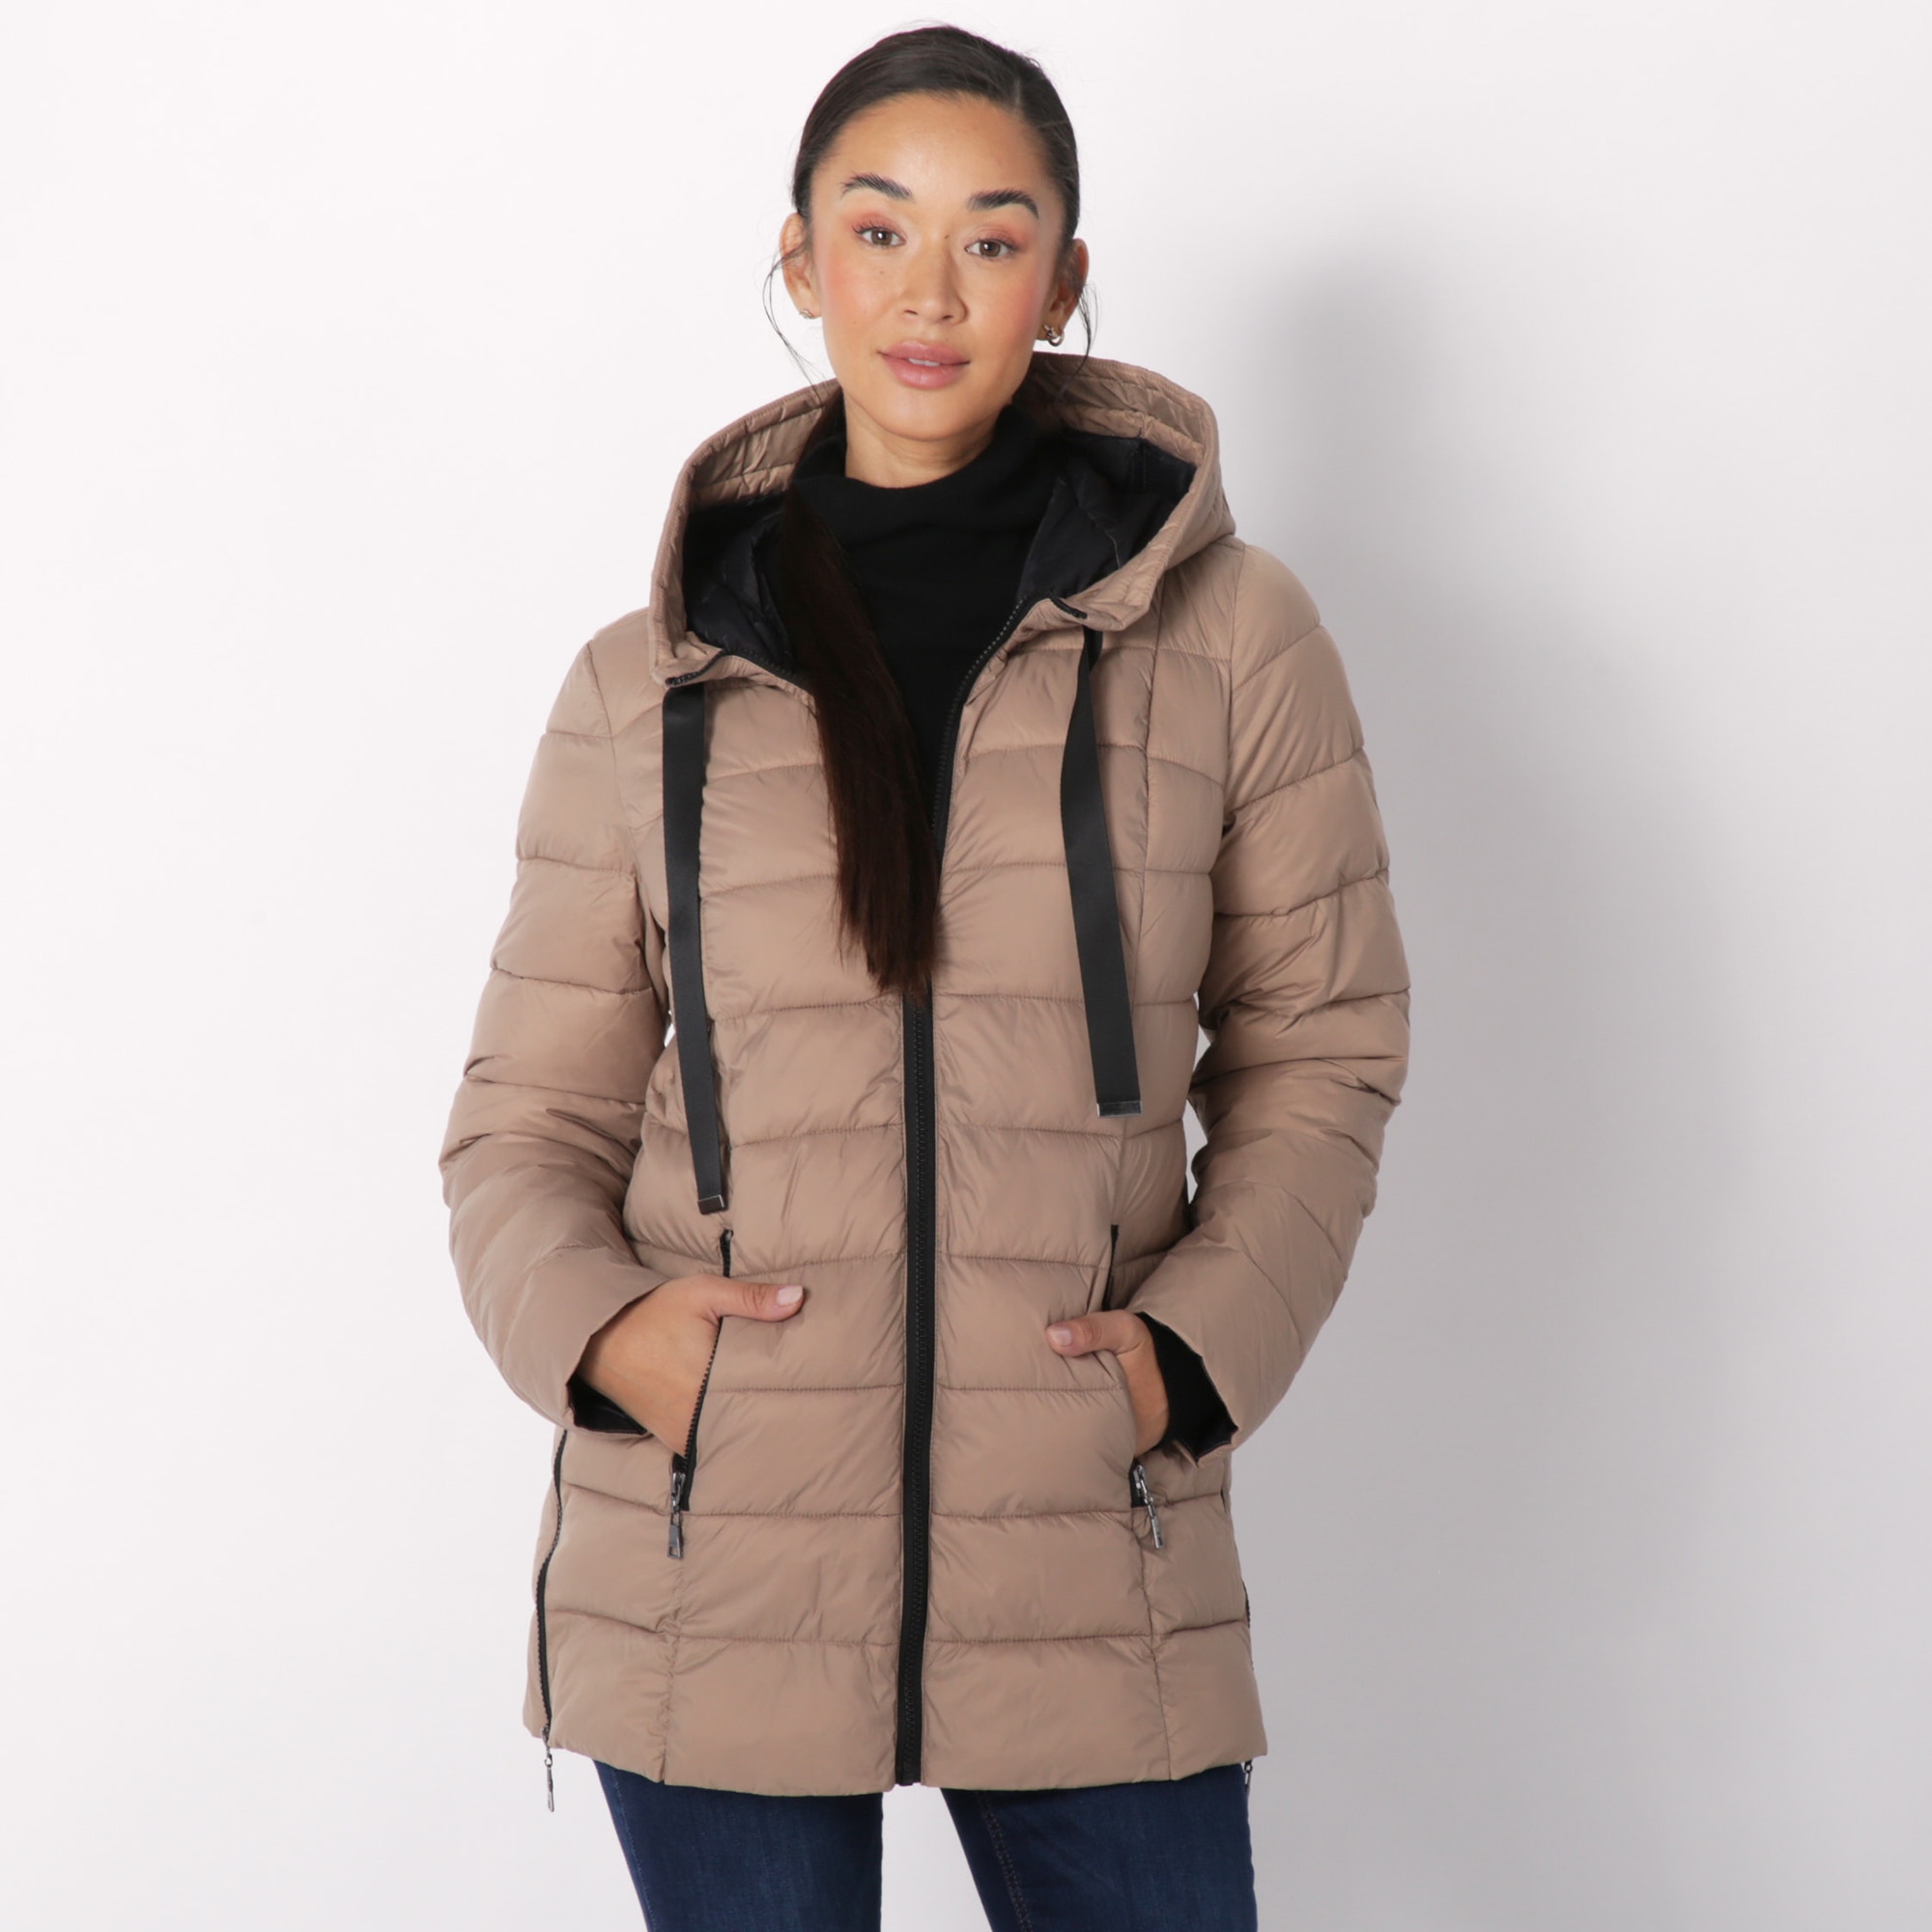 Nuage Ladies Puffer Jacket With Fixed Hood